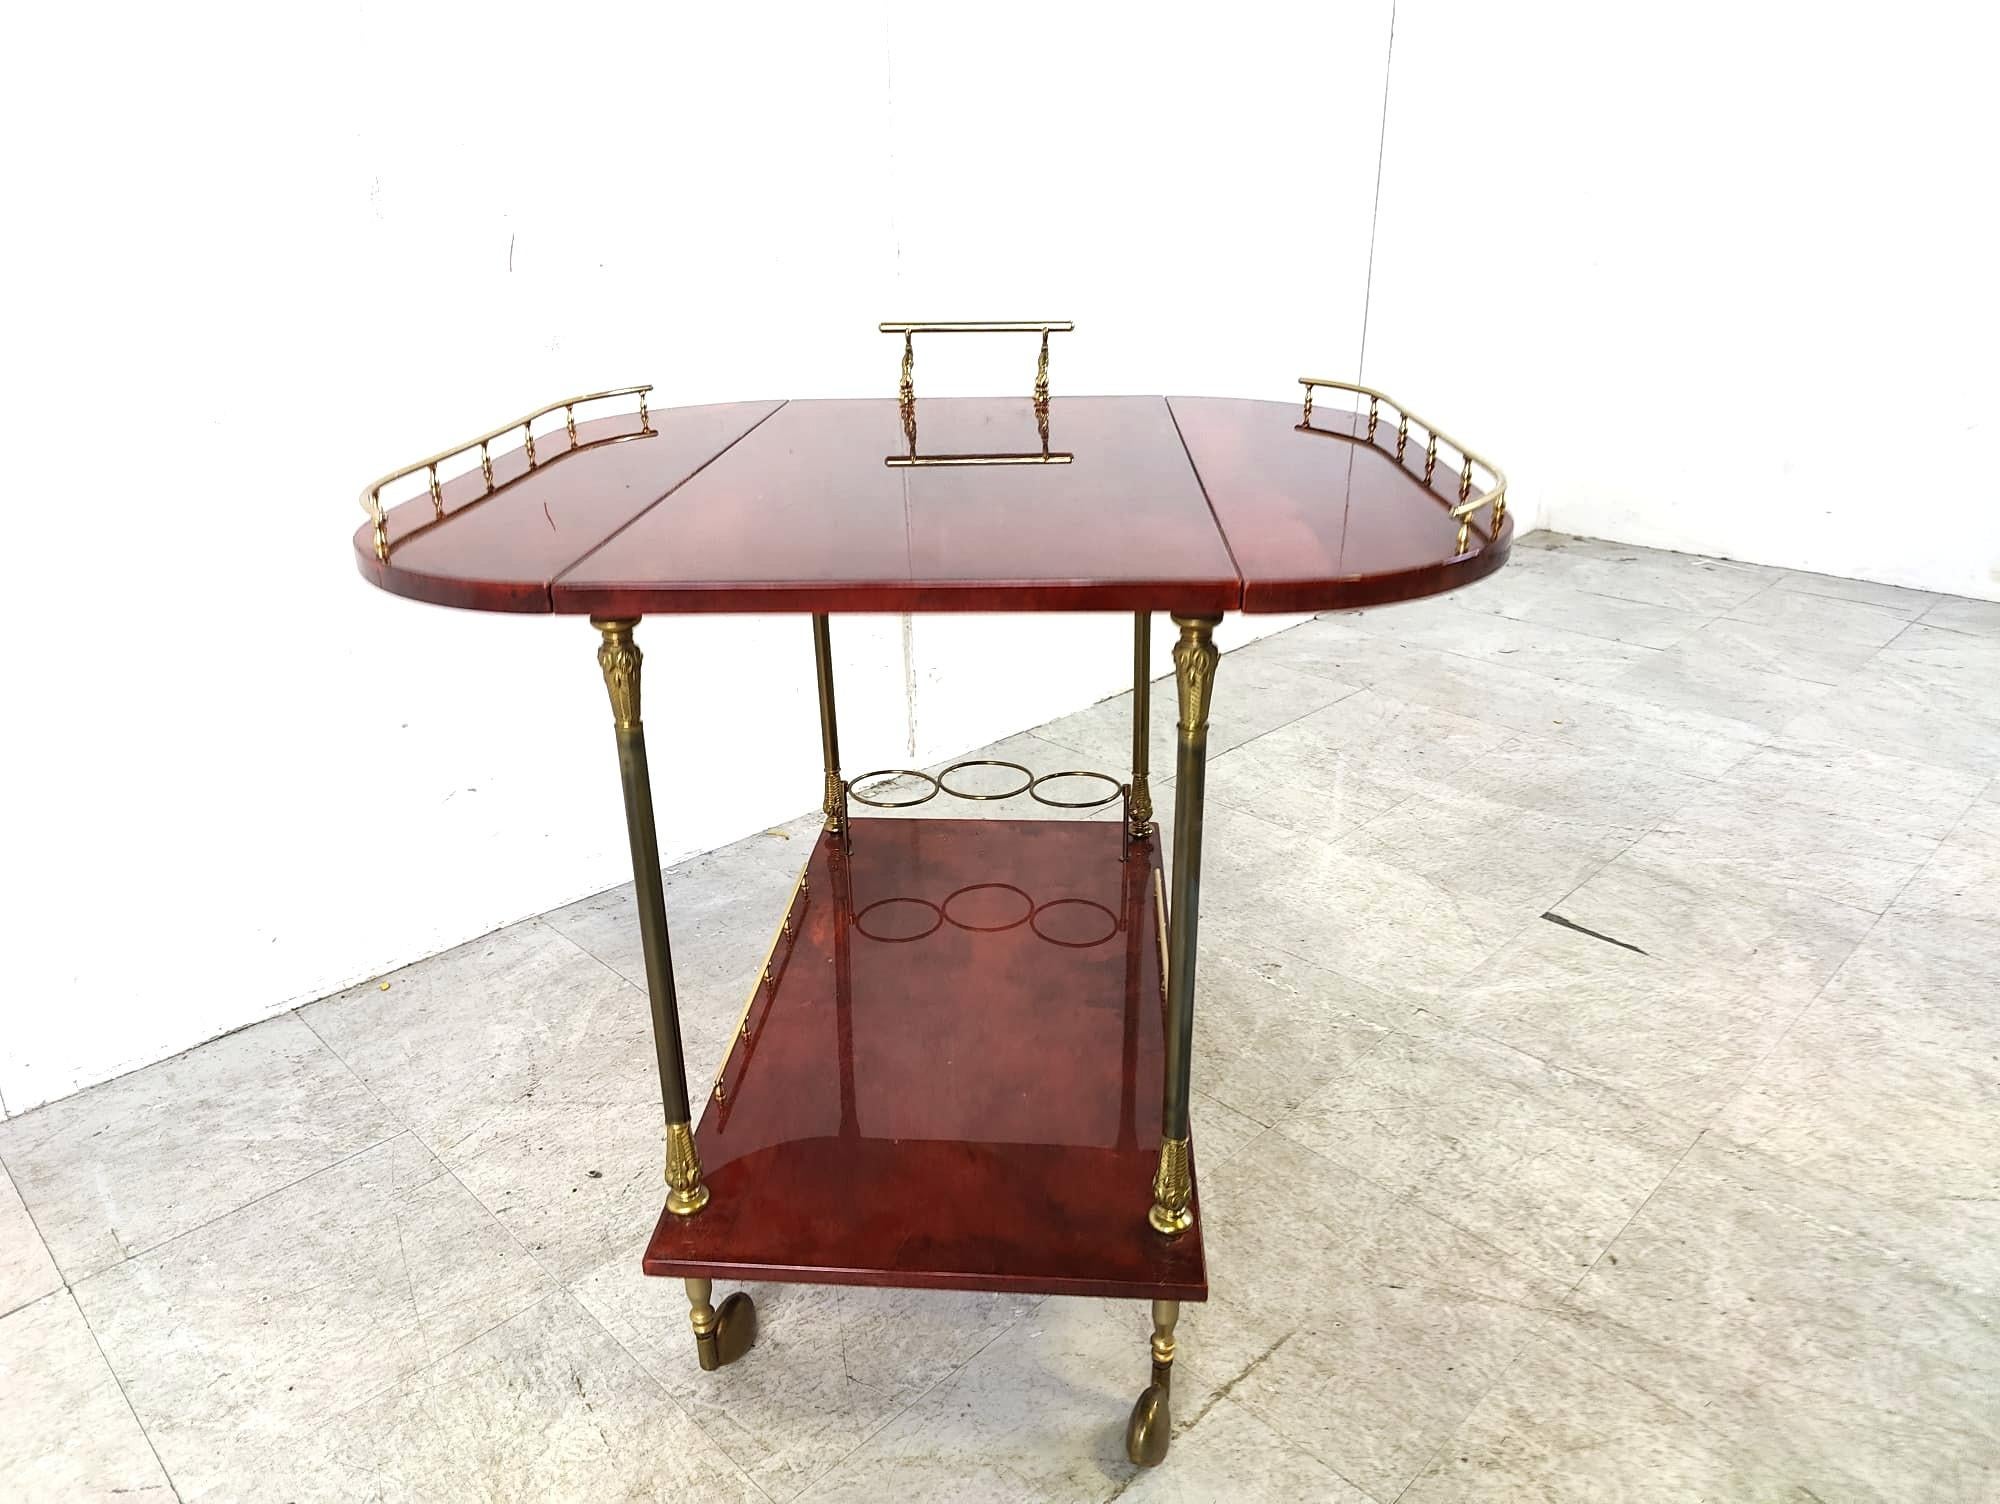 Very rare Aldo Tura Goatskin or parchment bar cart. This bar cart was made in Italy in the 1960s. 

Constructed of lacquered goatskin / parchment and gilt metal hardware.

The table tops can fold down to make the car narrower when needed.

Perfect